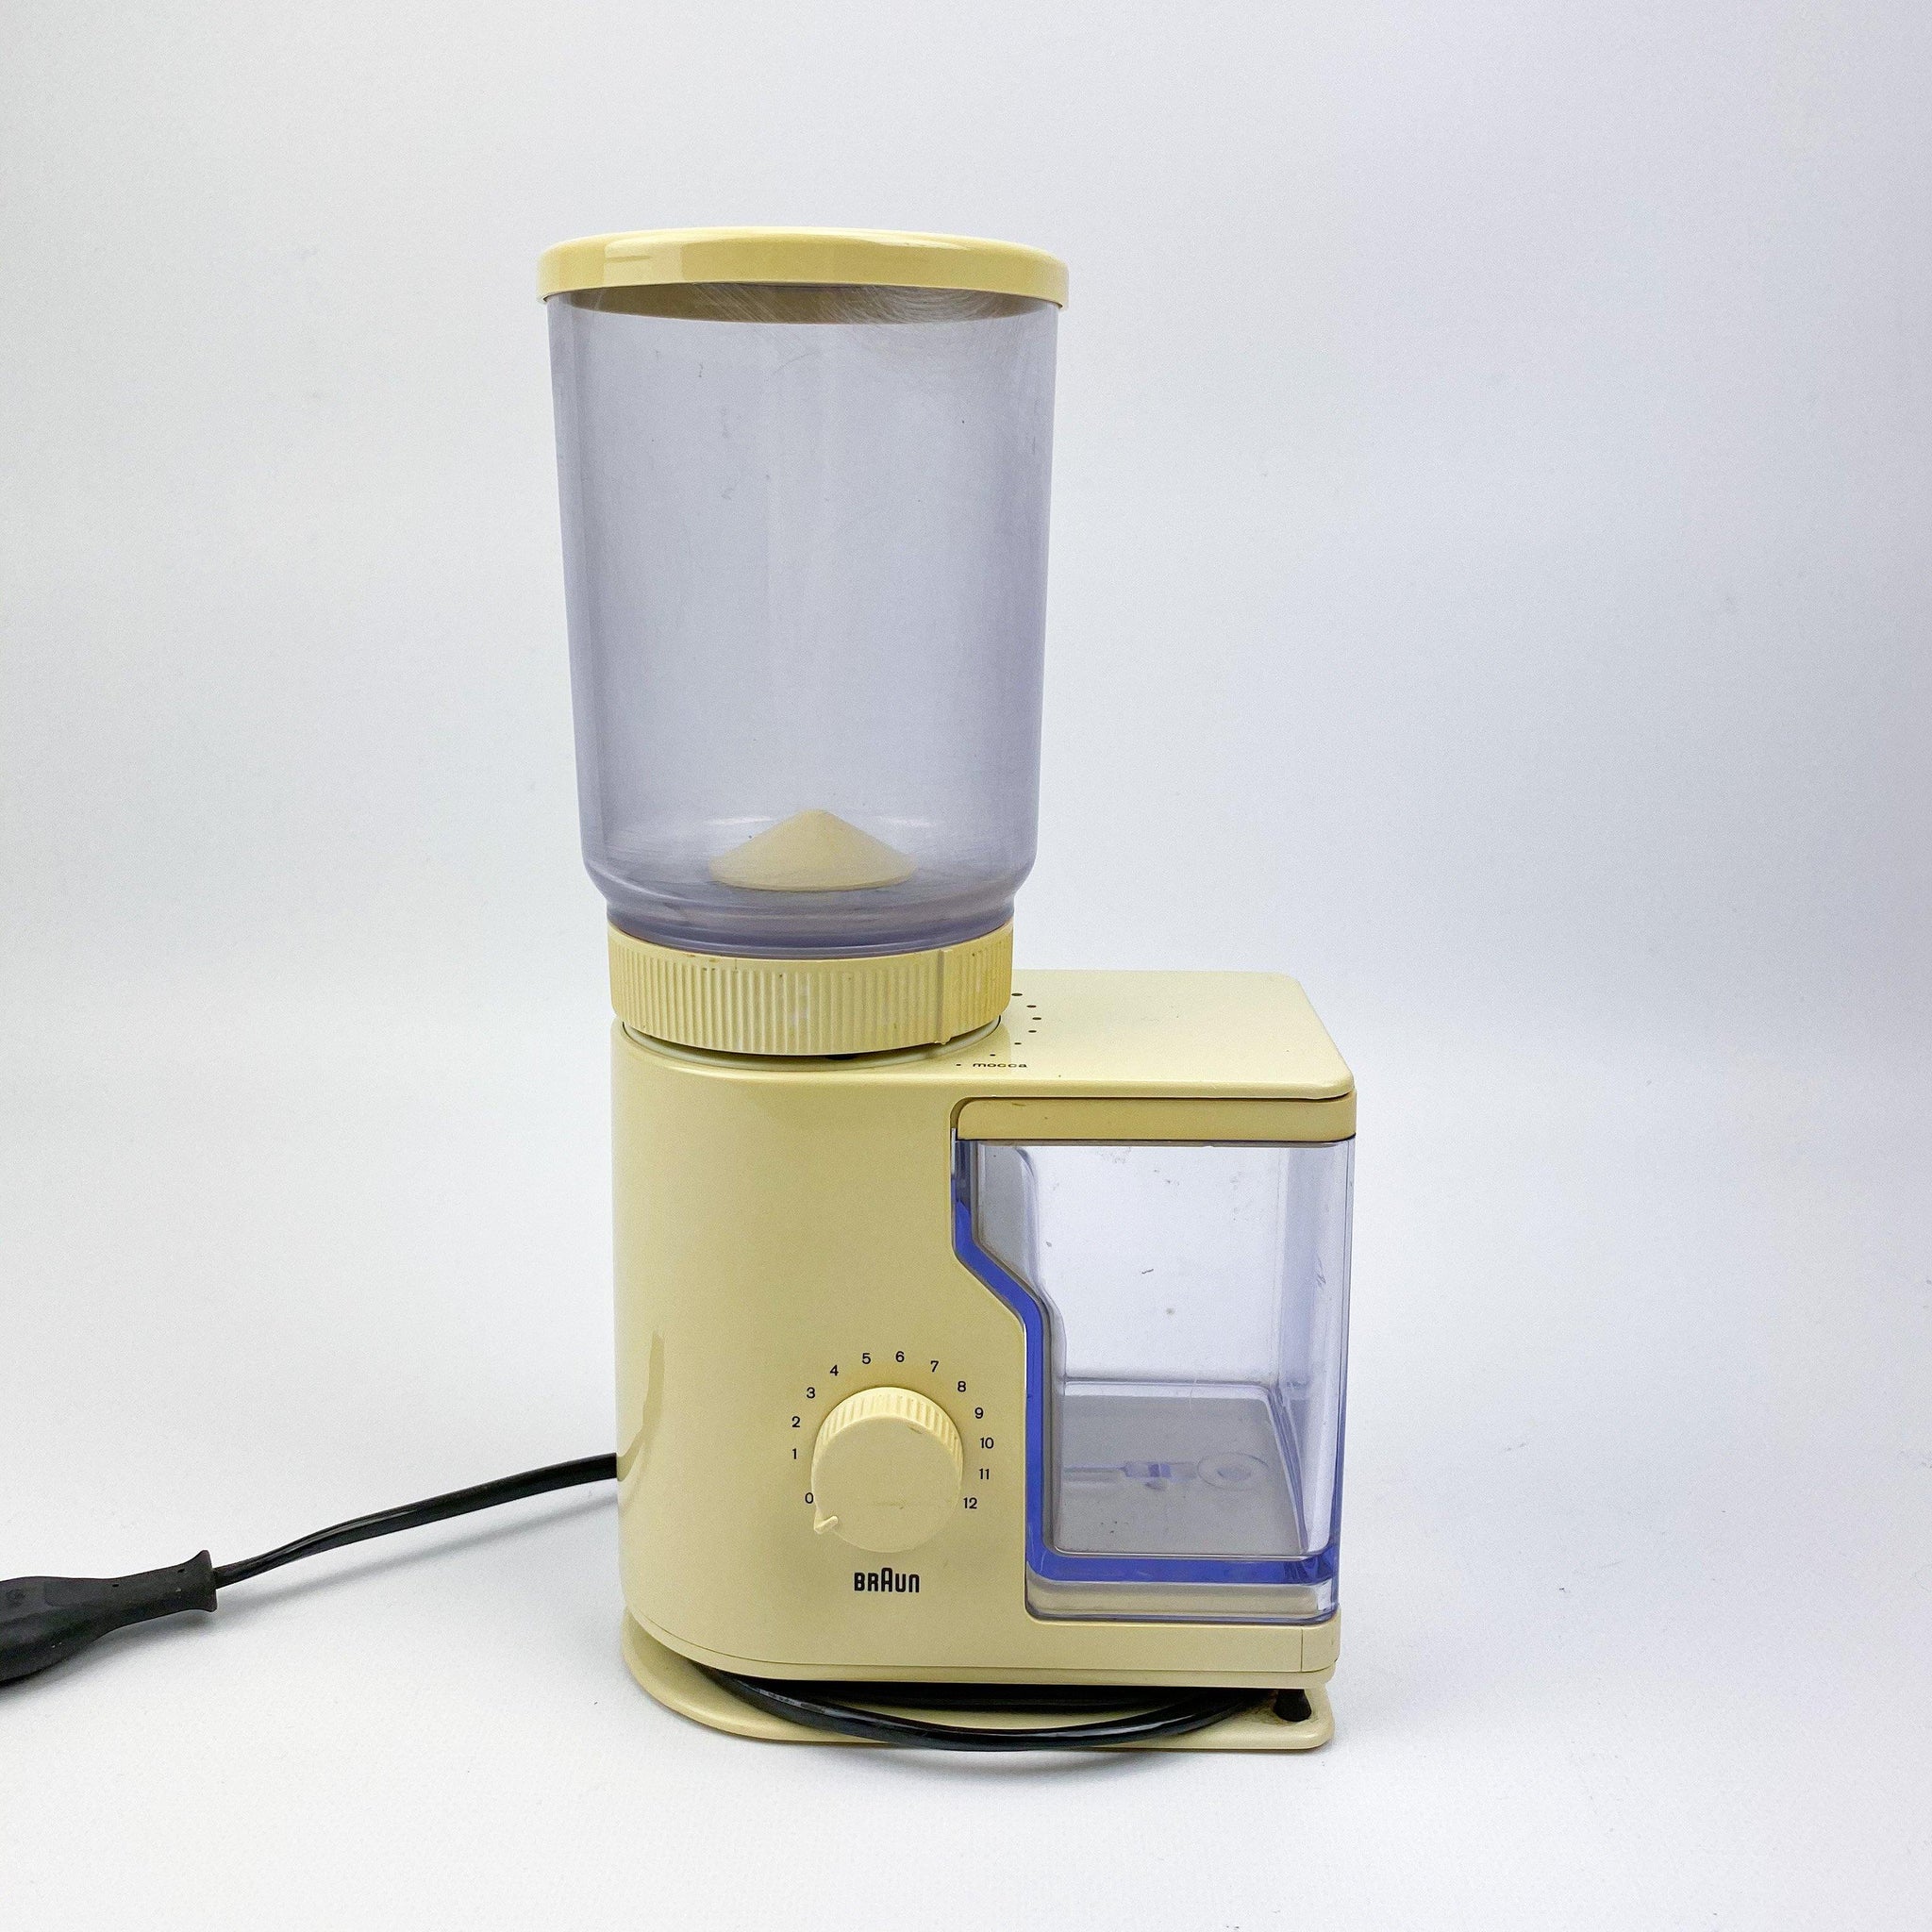 Braun KMM10 coffee grinder designed by Reinhold Weiss and Hartwig Kahlcke  for Braun, 1975 – falsotecho